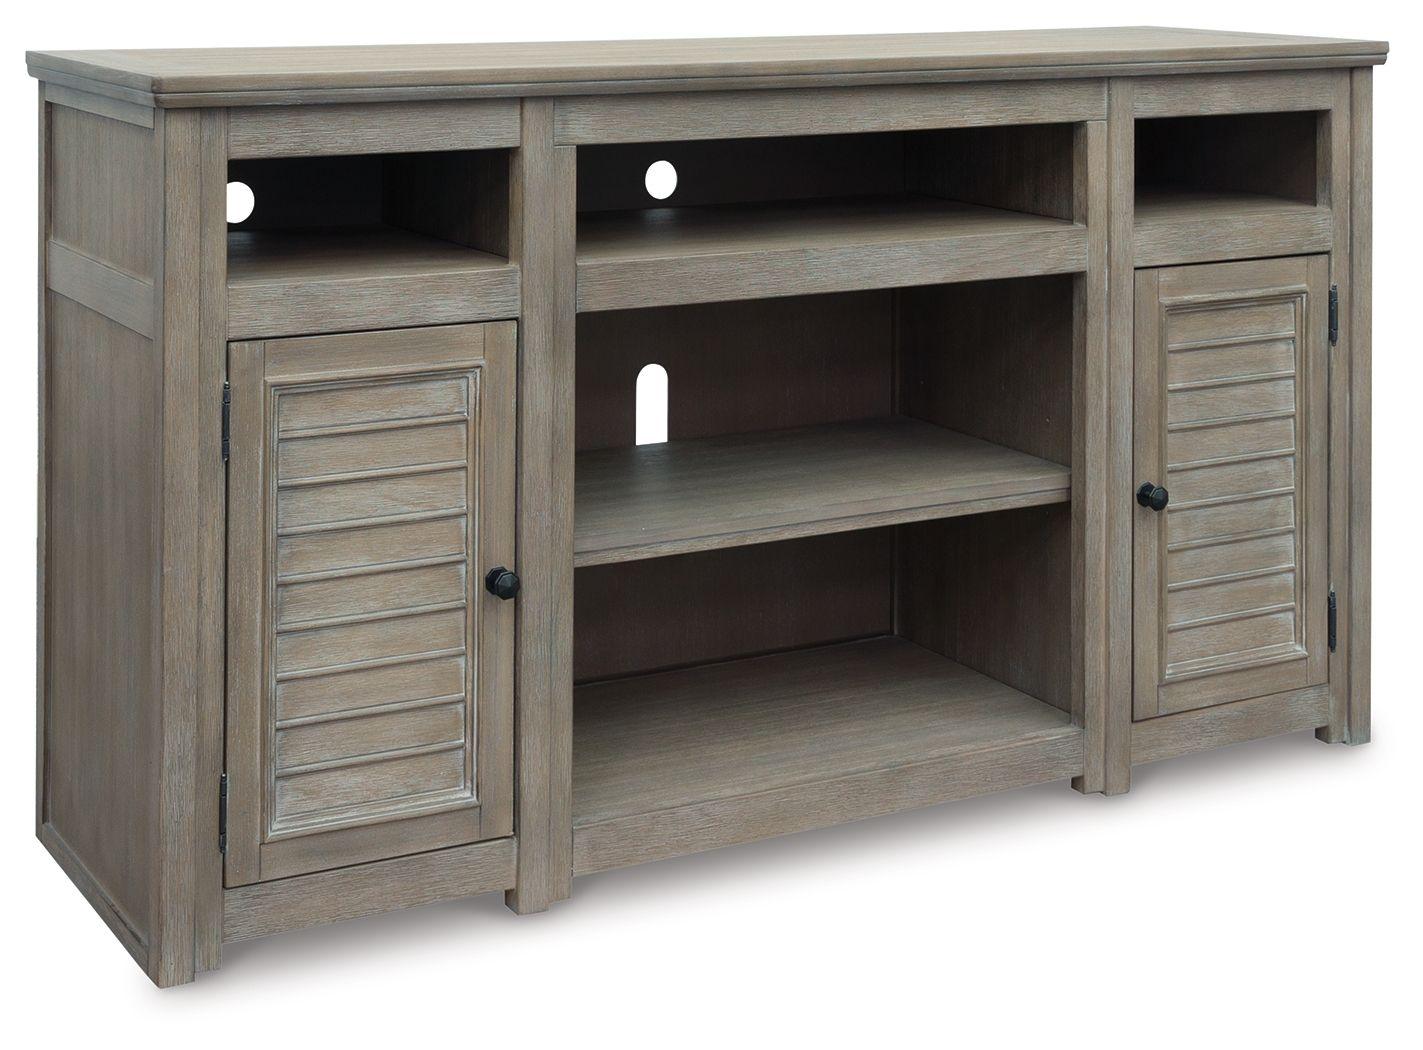 Signature Design by Ashley® - Moreshire - Bisque - 72" TV Stand W/Fireplace Option - 5th Avenue Furniture